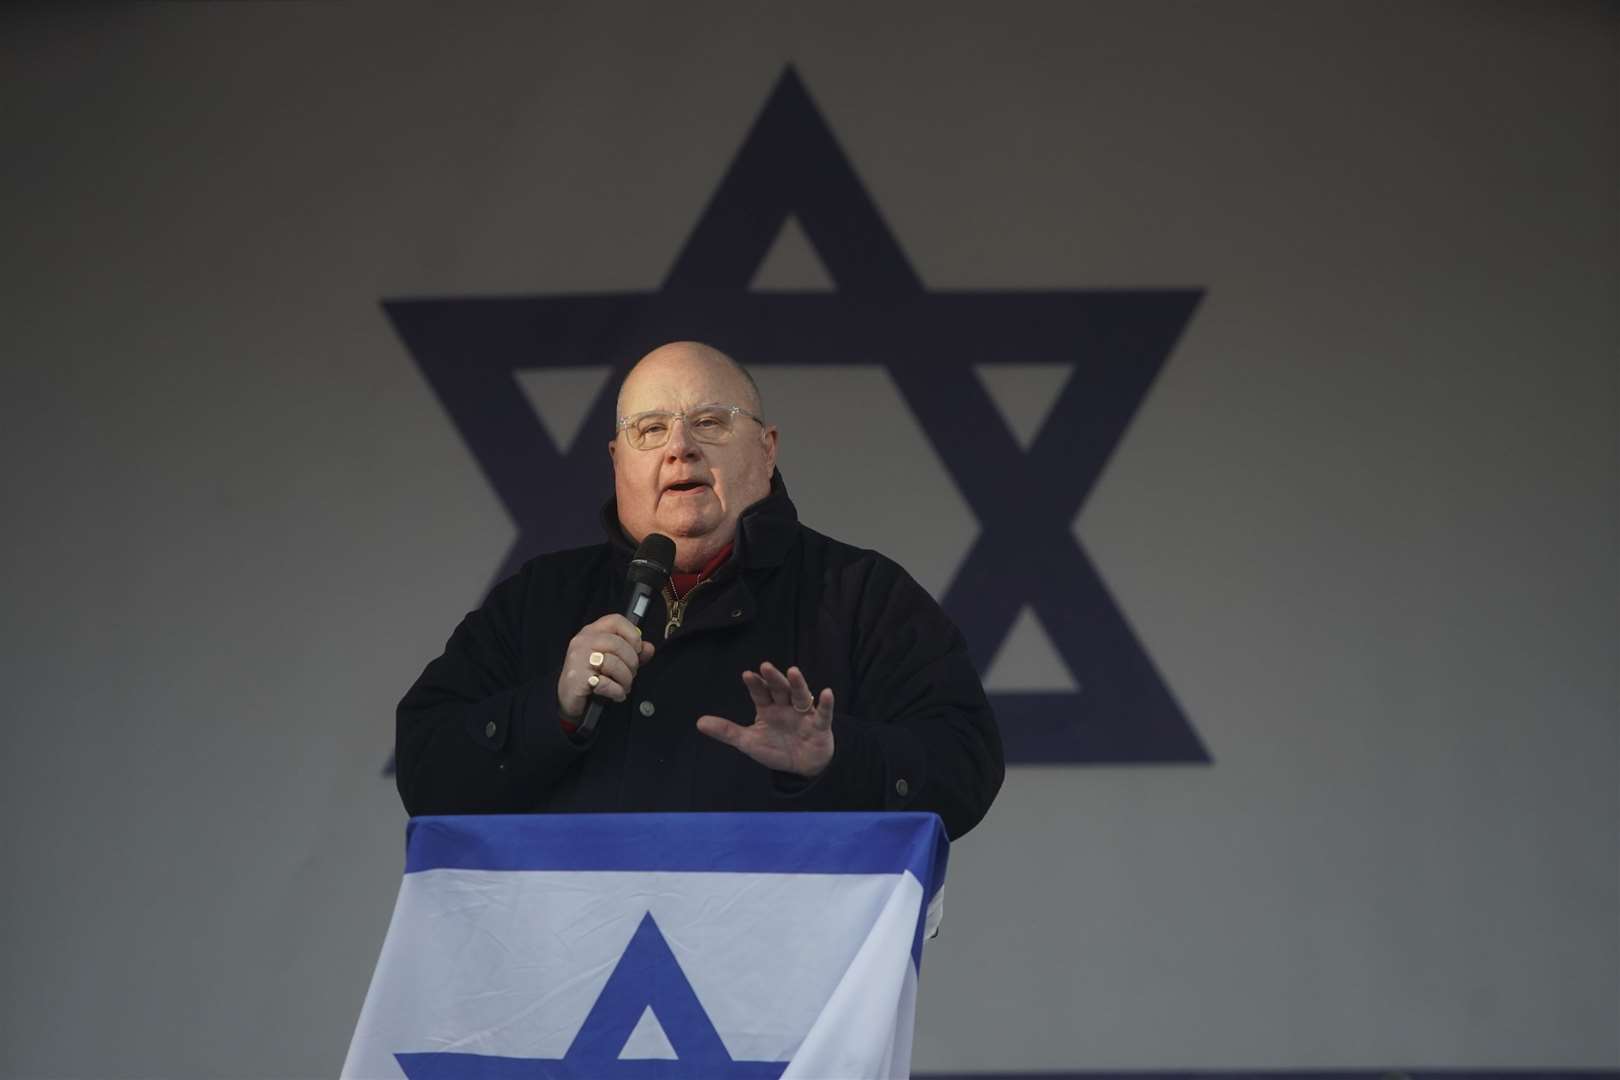 Lord Pickles called himself a ‘committed and unapologetic Zionist’ (Jeff Moore/PA)